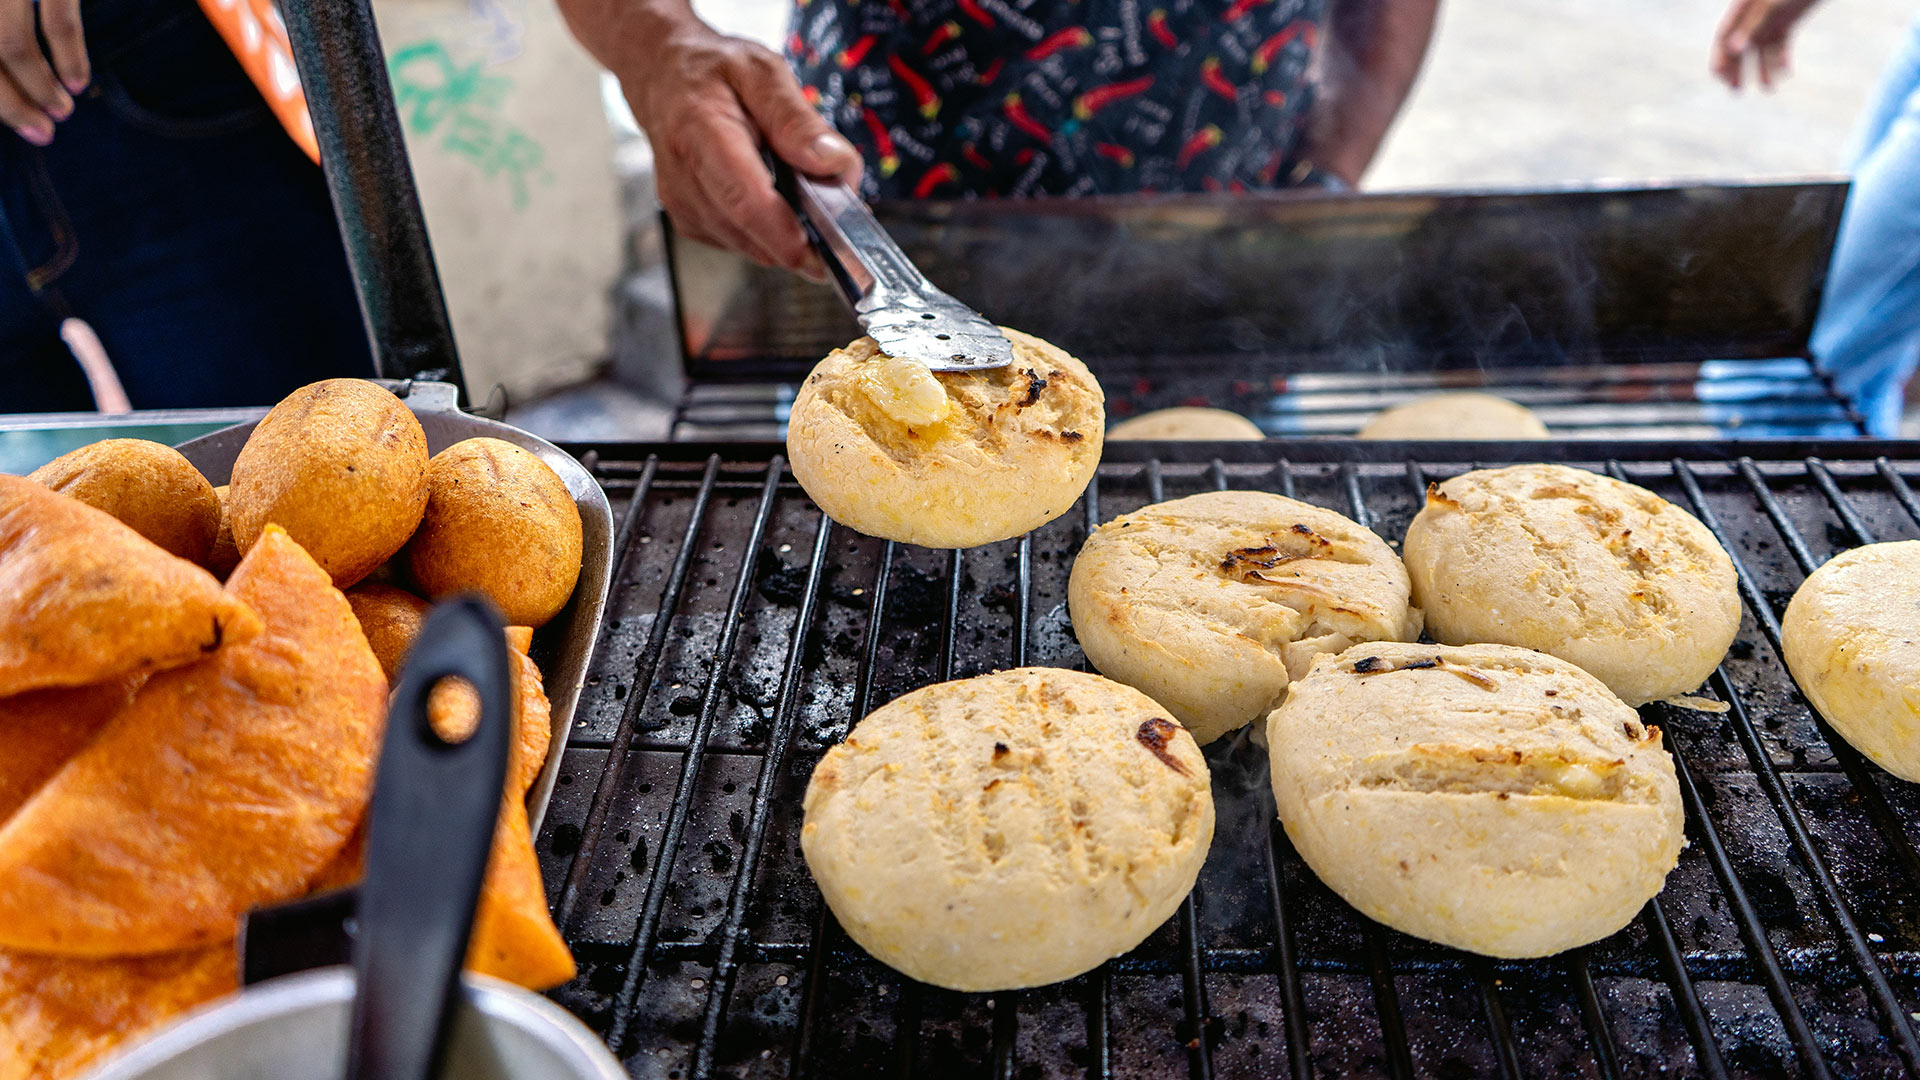 A man grills arepas in Bogota, Colombia